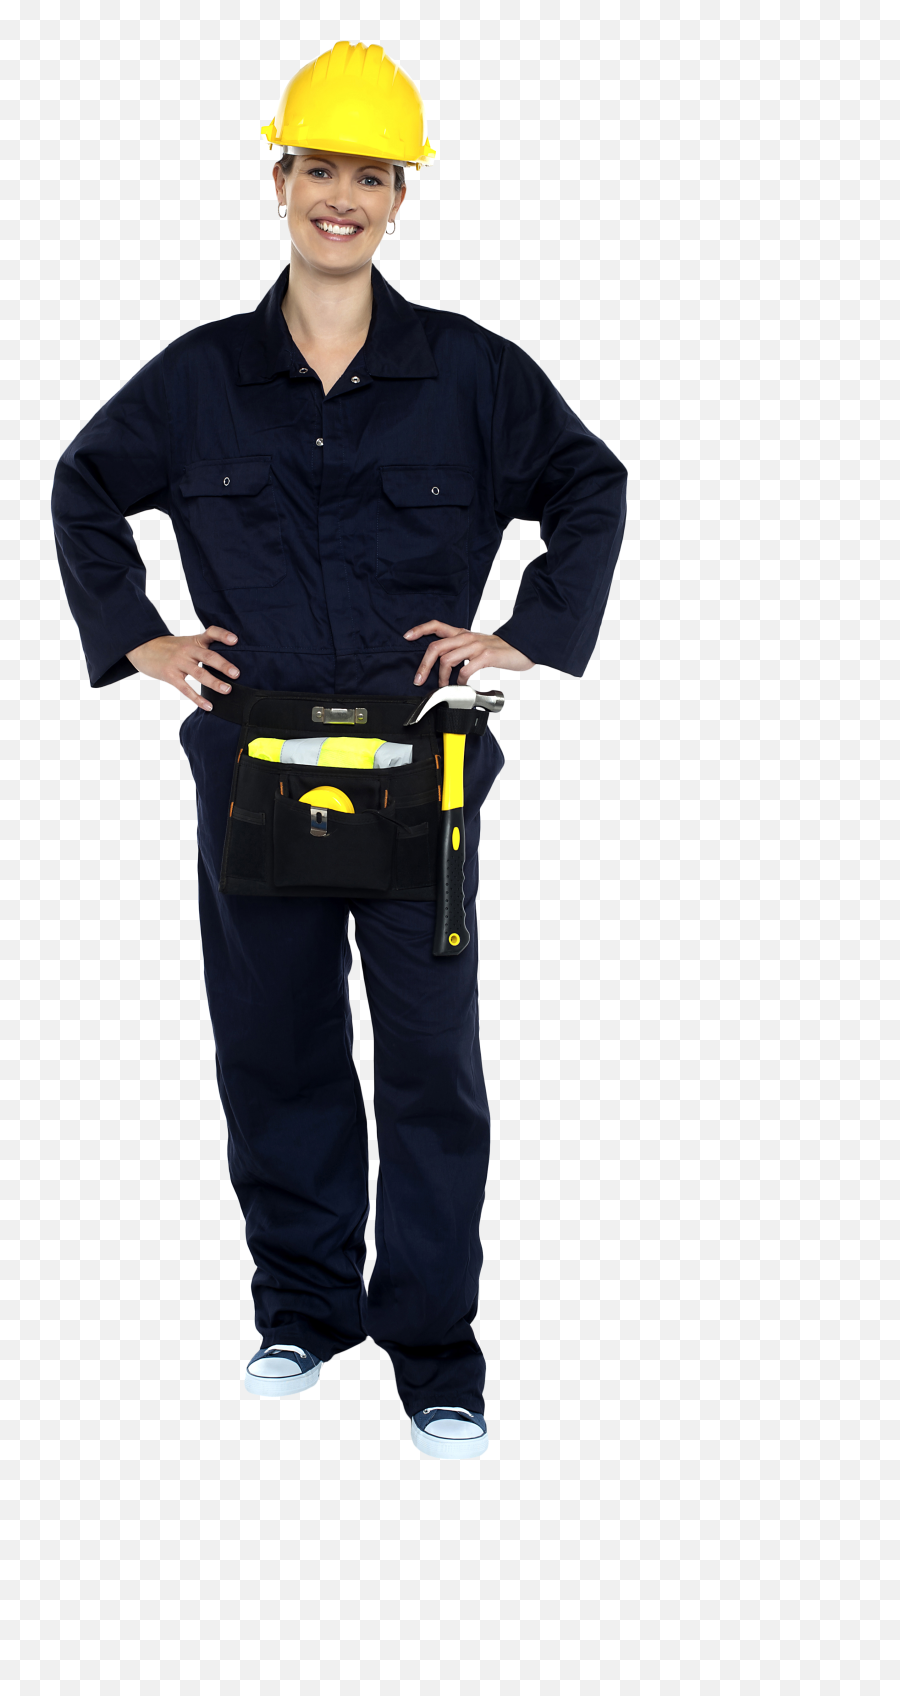 Women Worker Png Image - Portable Network Graphics Emoji,Construction Worker Png